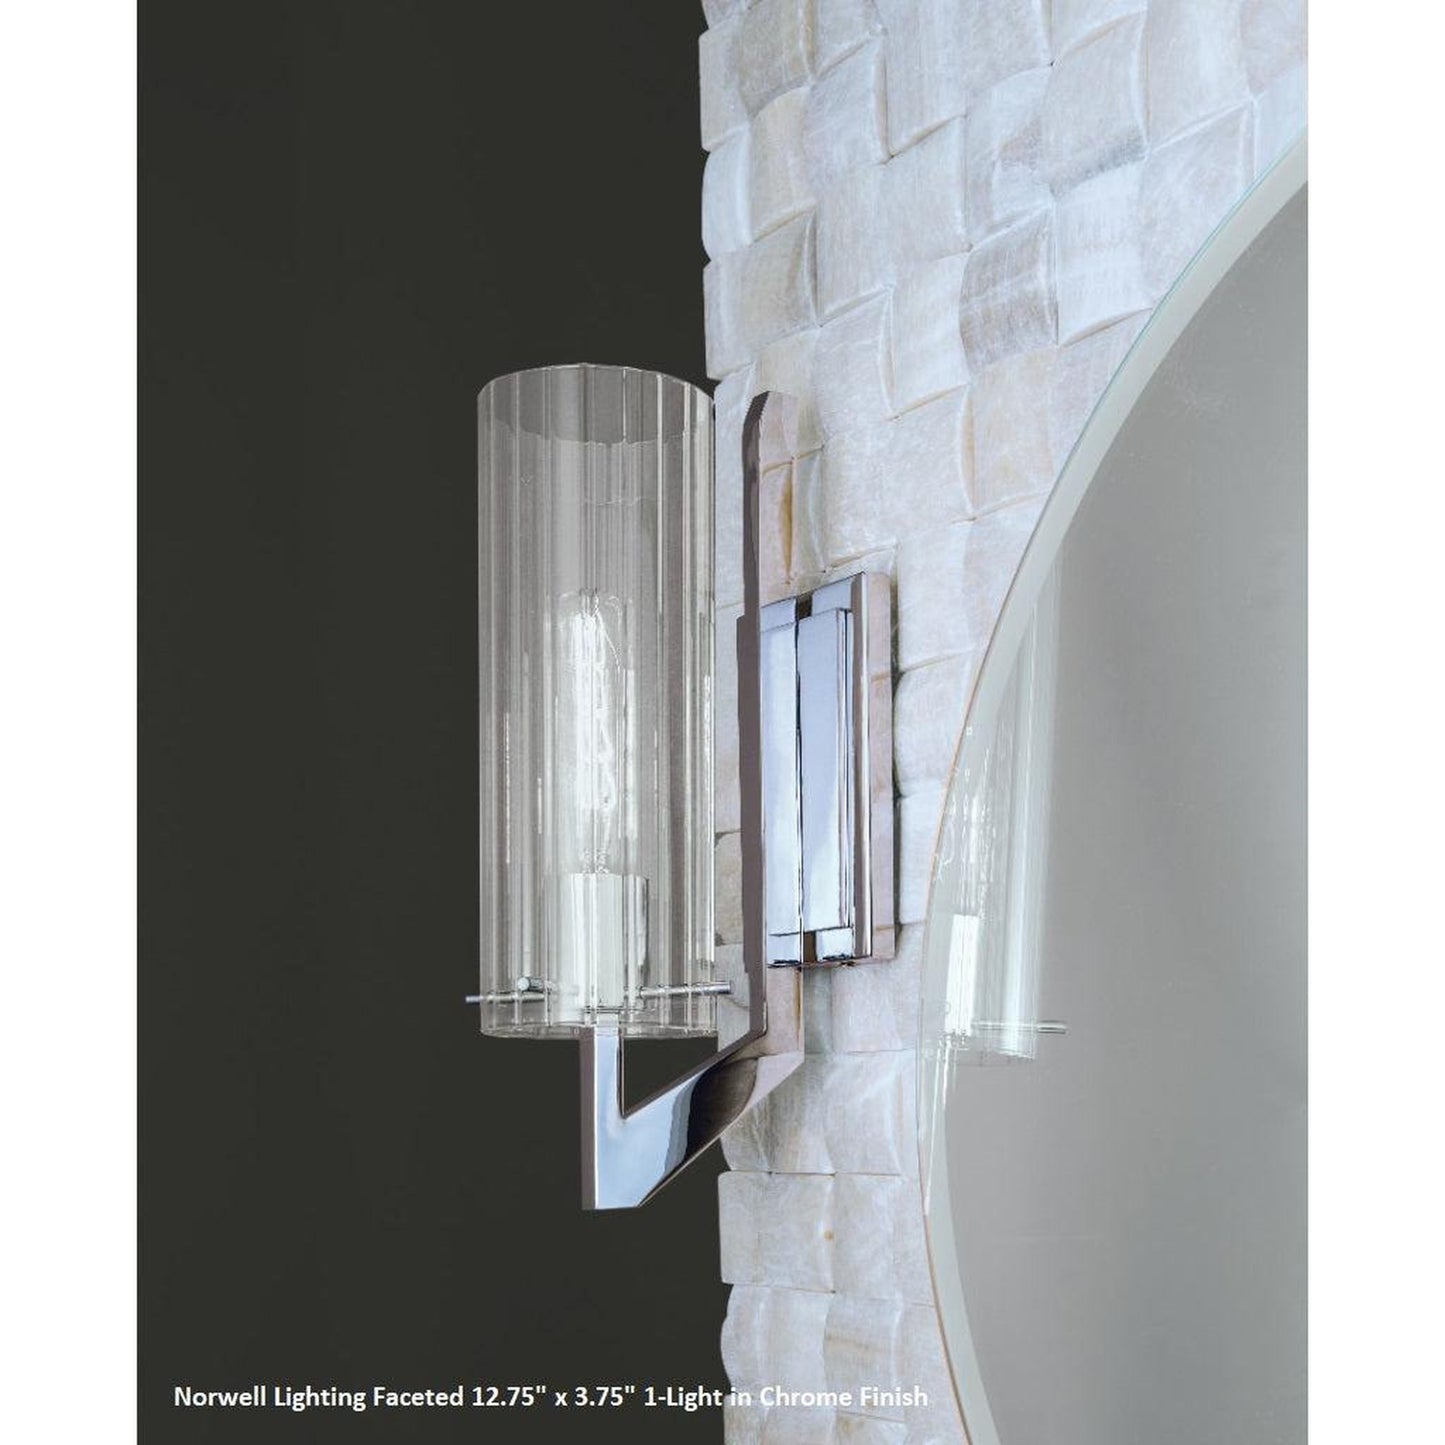 Norwell Lighting Faceted 13" x 4" 1-Light Chrome Vanity Wall Sconce With Clear Glass Diffuser